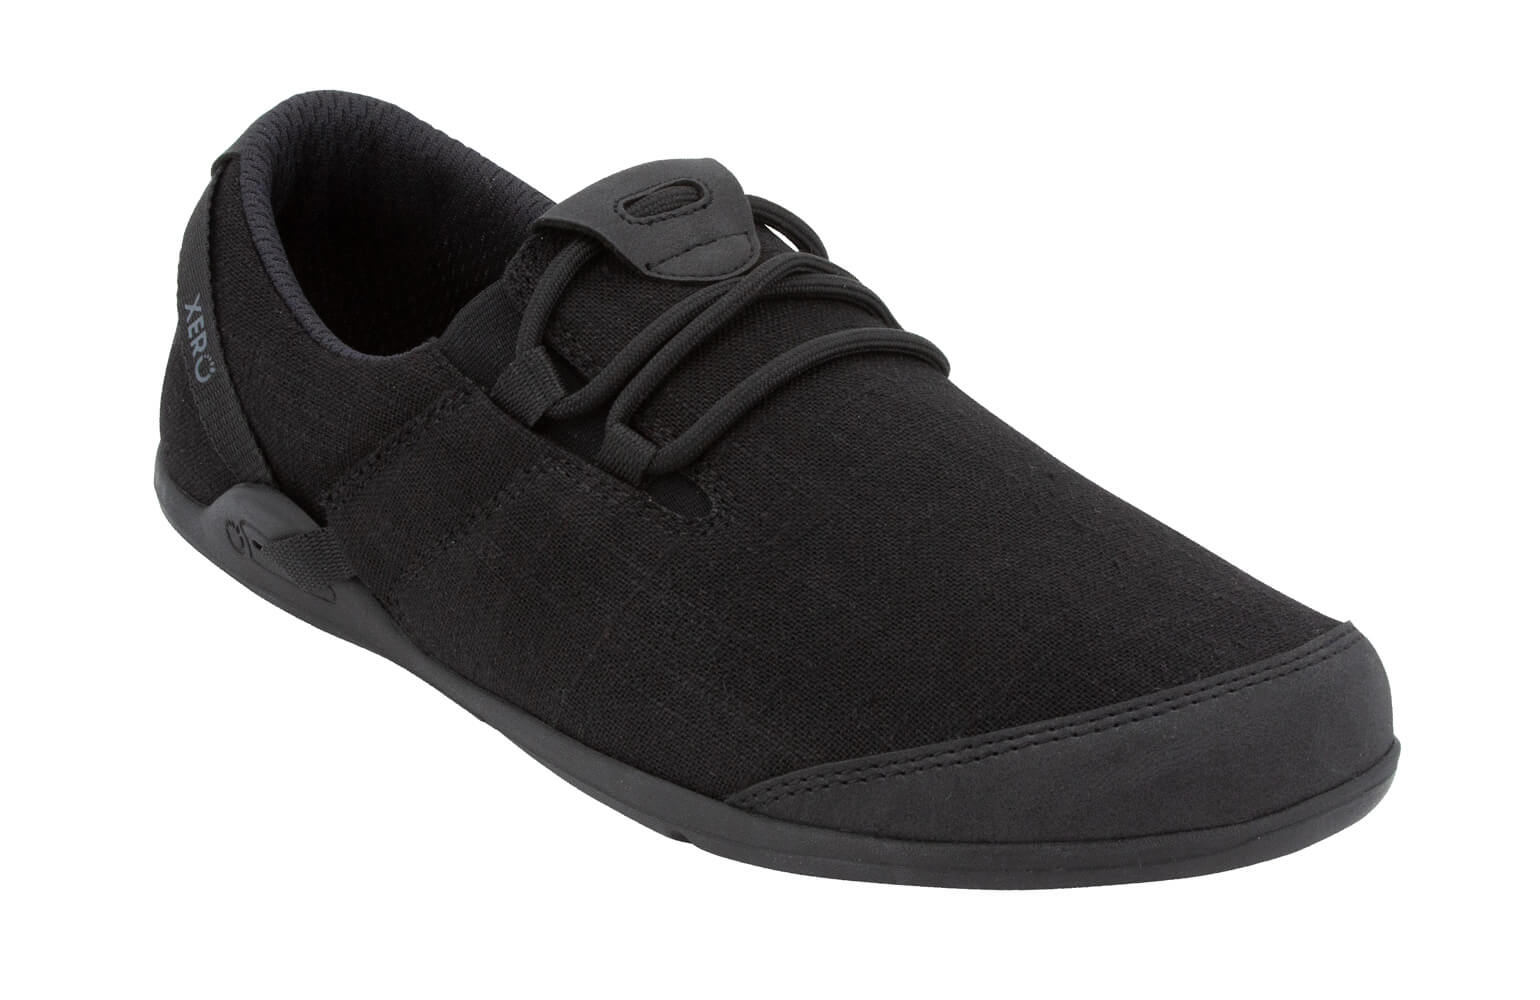 Awesome casual minimalist shoe from Xero Shoes